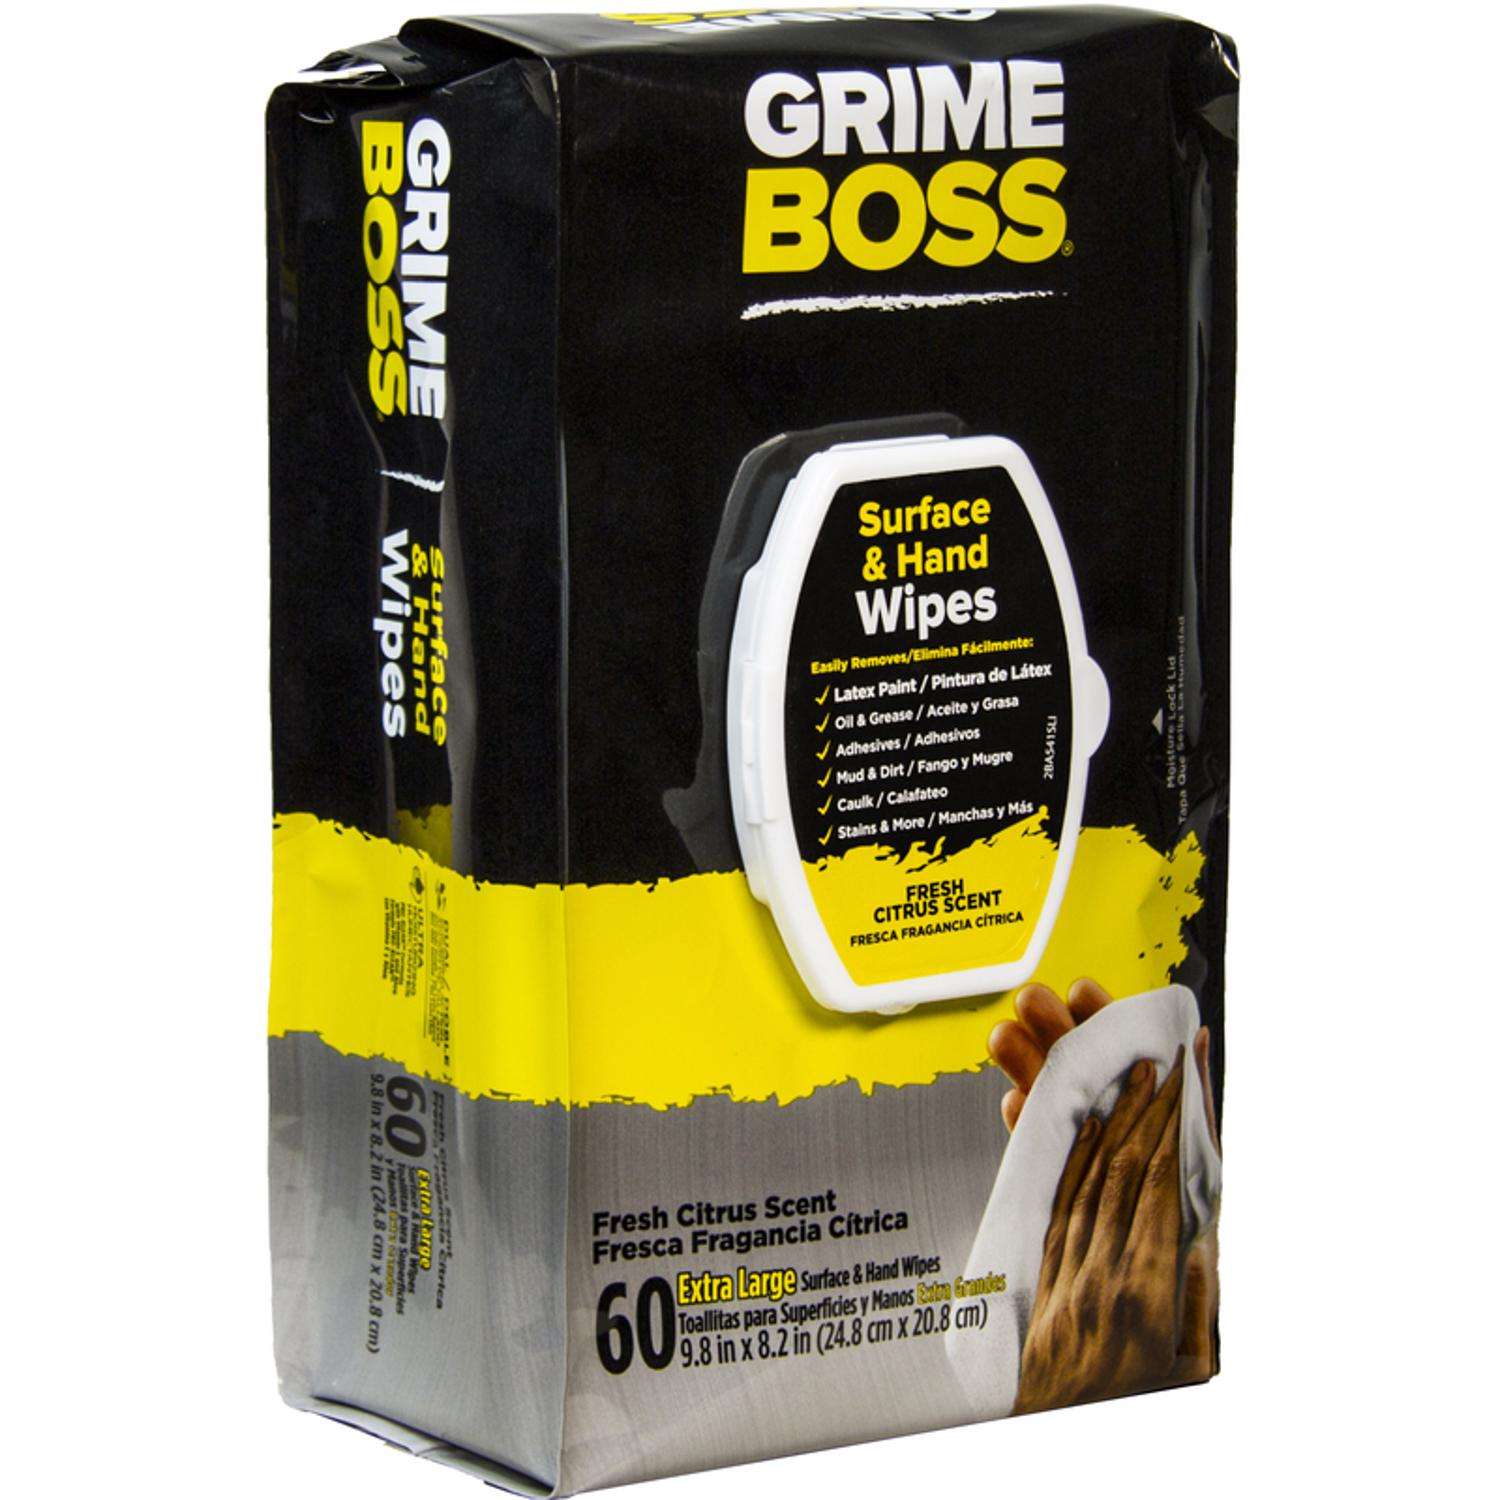 Grime Boss Fiber Blend Scrubbing Household Disinfecting Wipes 8 in